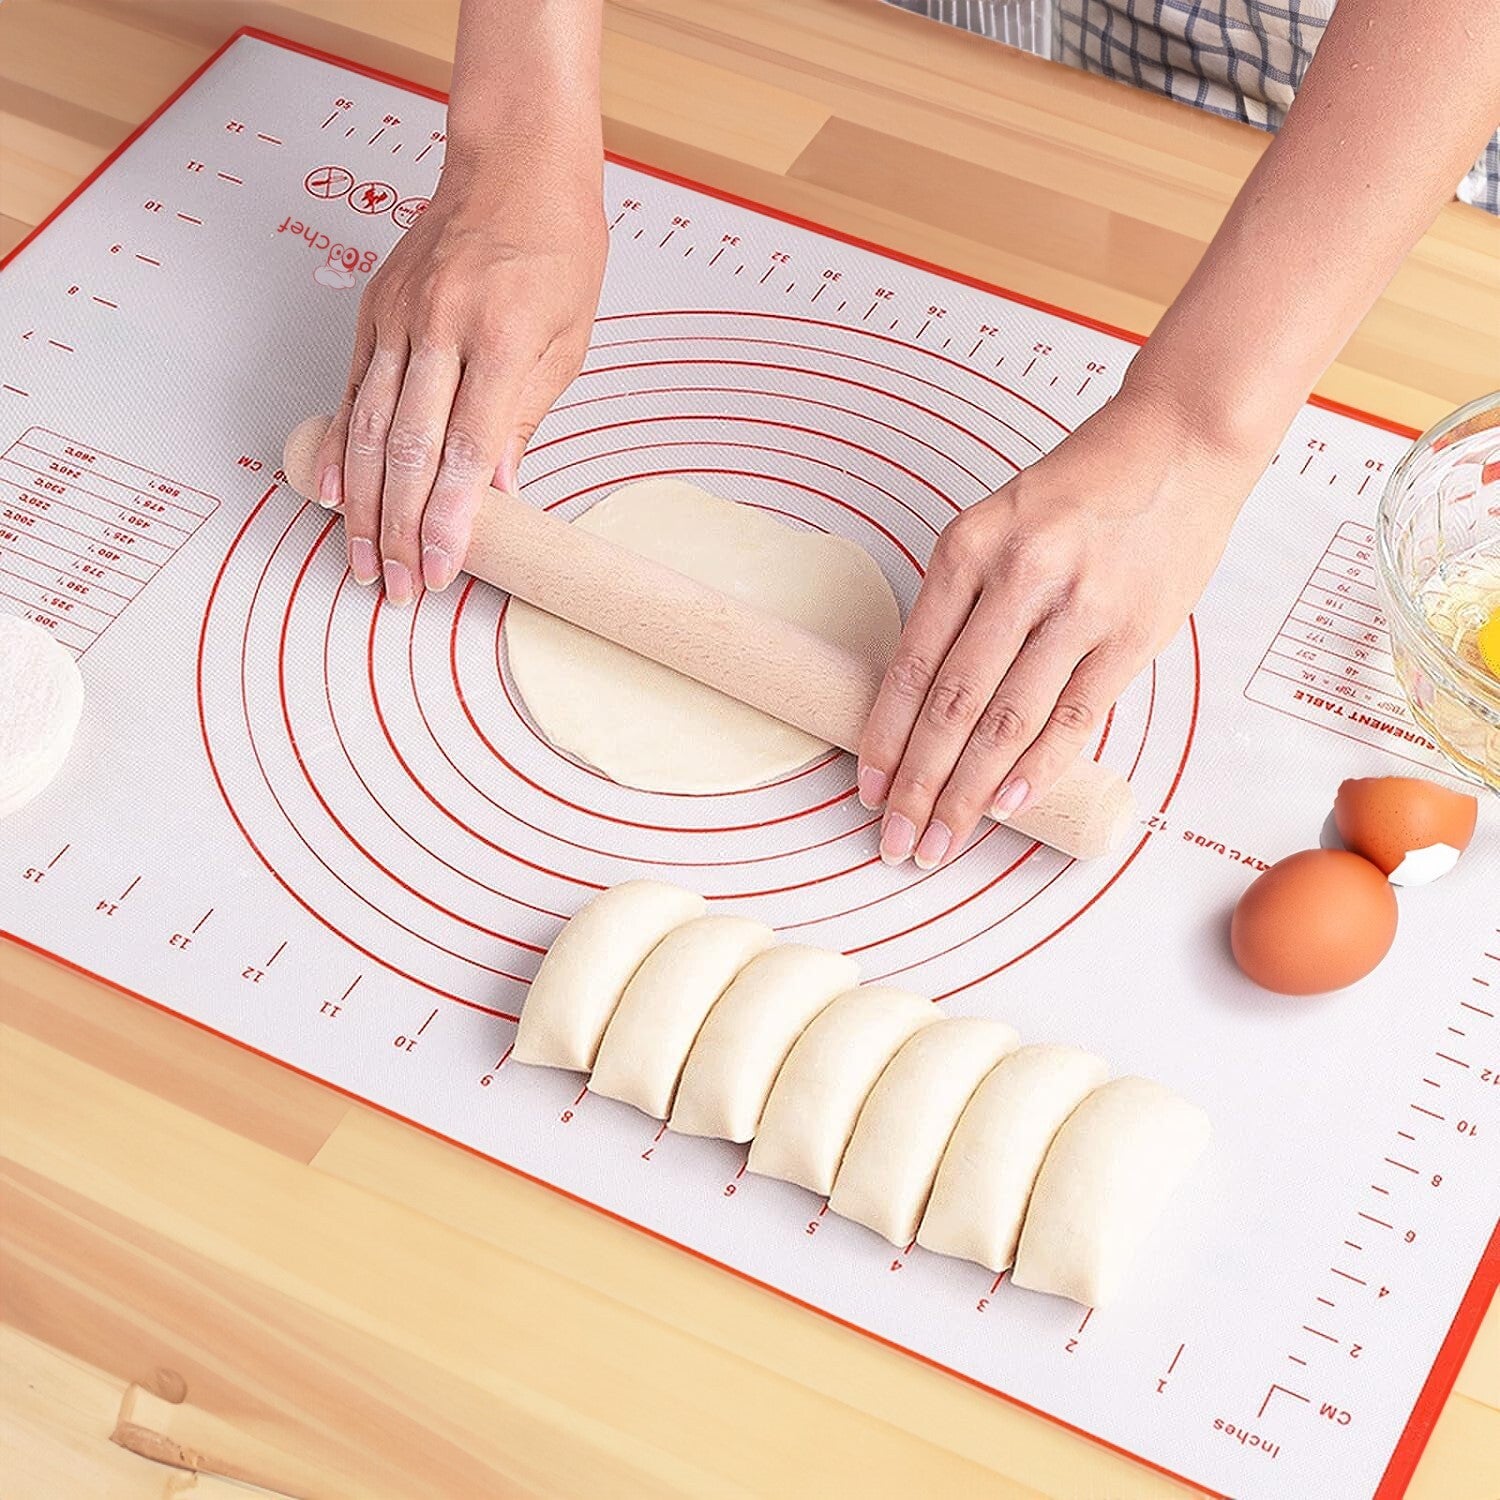 Extra Large Kitchen Silicone Pad, Non Stick Non Slip Silicone Pastry Mat  Kit,Heat Resistant Oven Mat,Reusable Silicone Baking Counter Mat for Dough